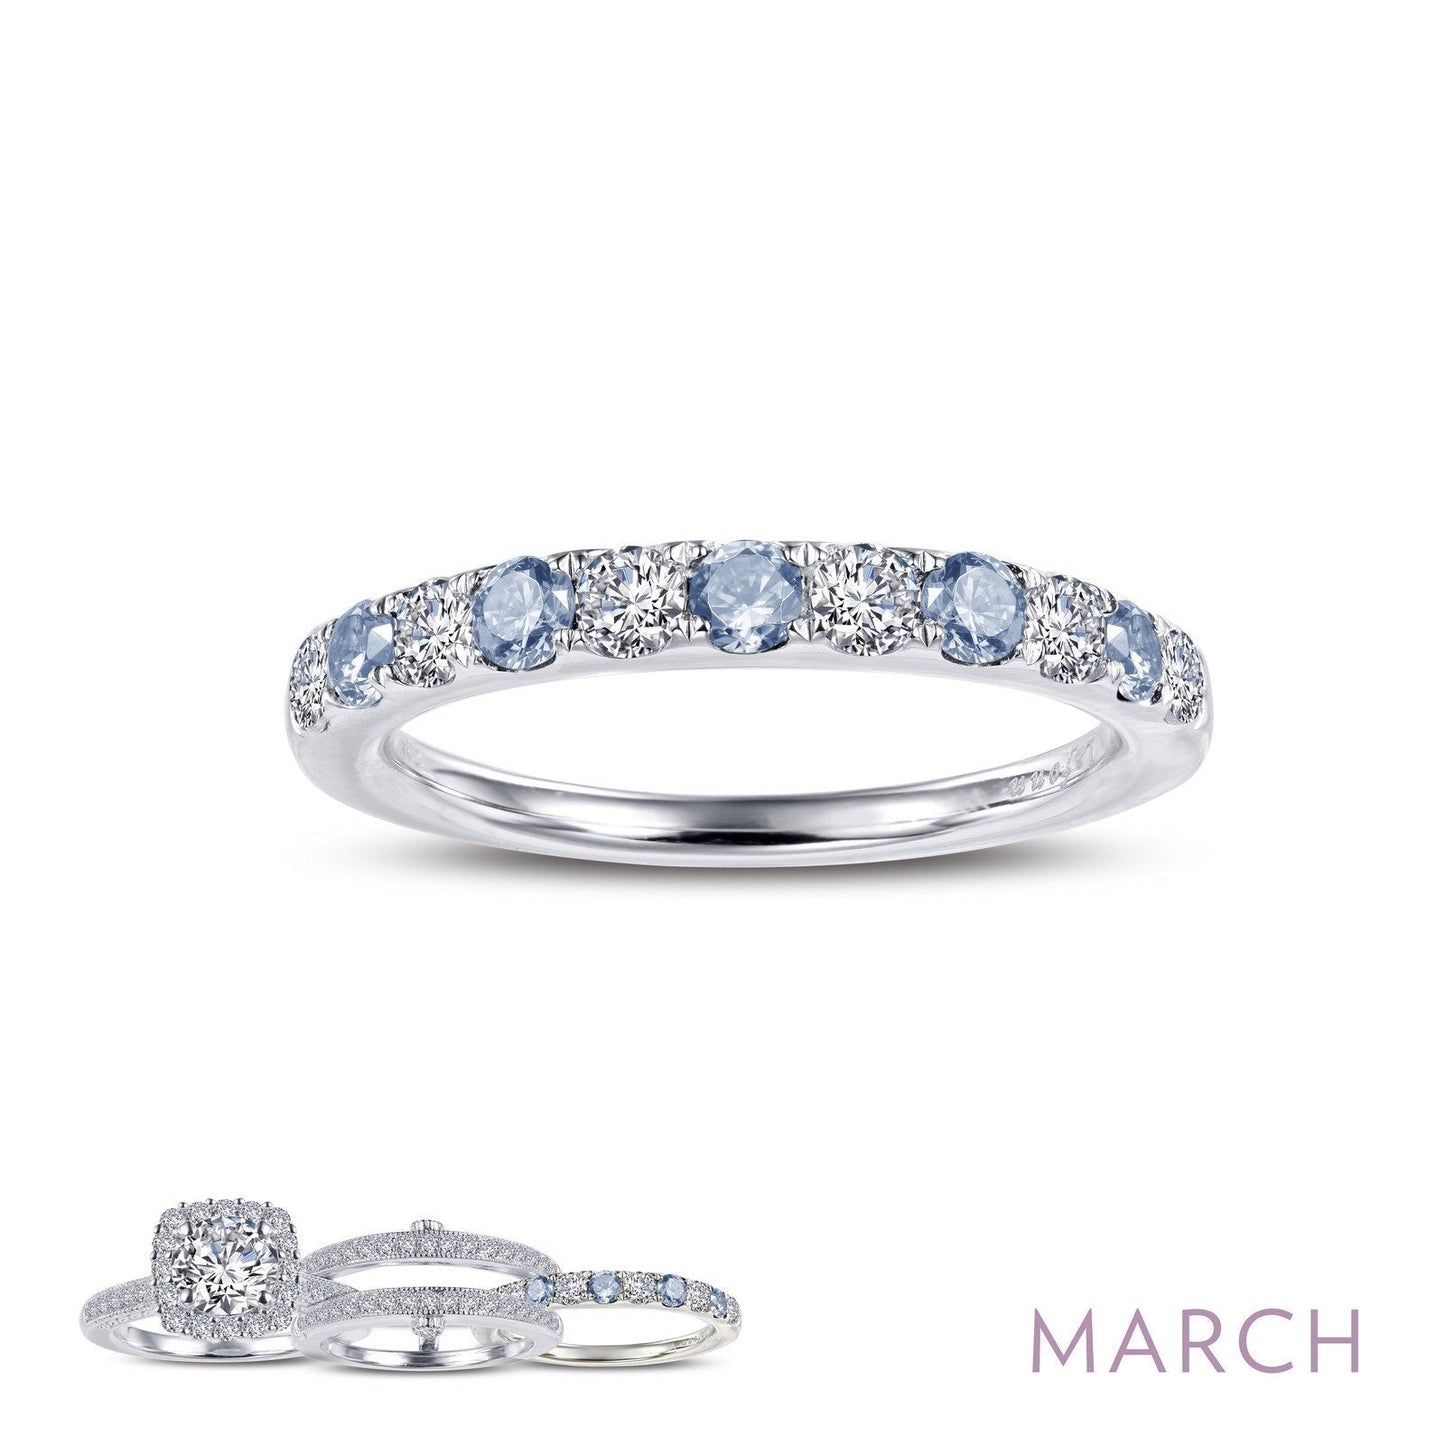 Load image into Gallery viewer, Lafonn March Birthstone Ring MARCH RINGS Size 6 Platinum 0.51cts CTS Approx.2.7mm(W)
